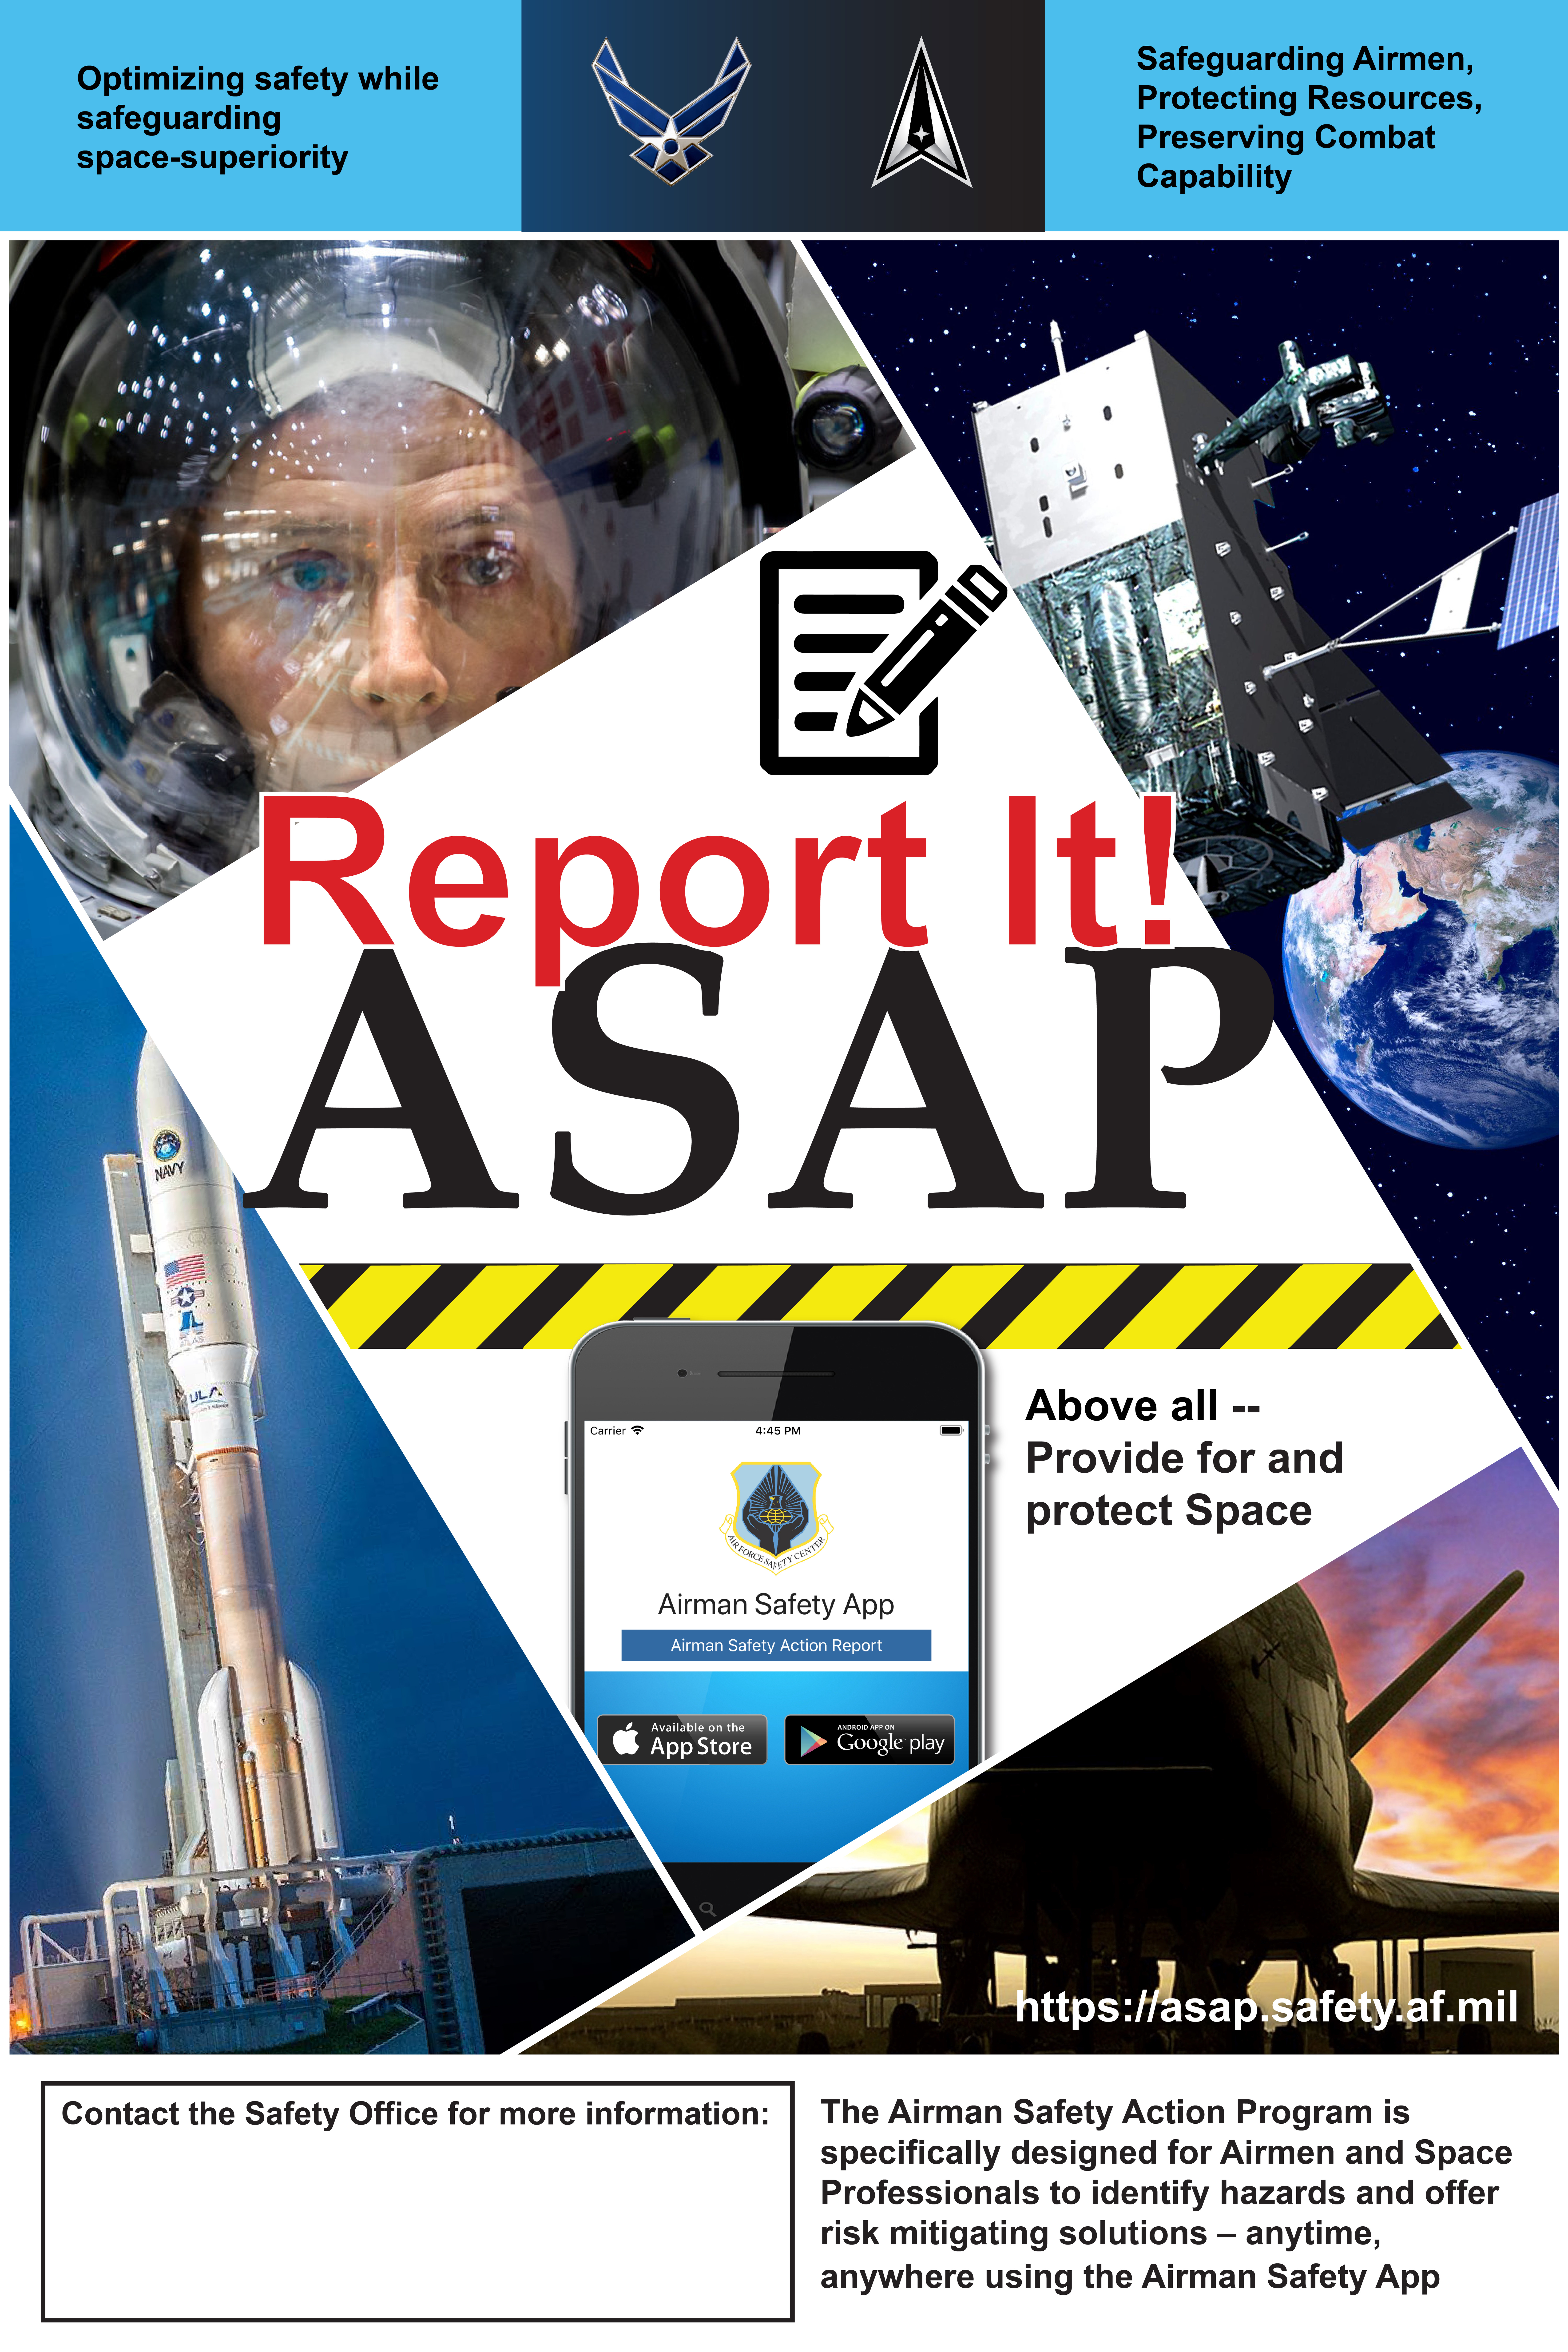 Link to Airman Safety Action Program Space poster